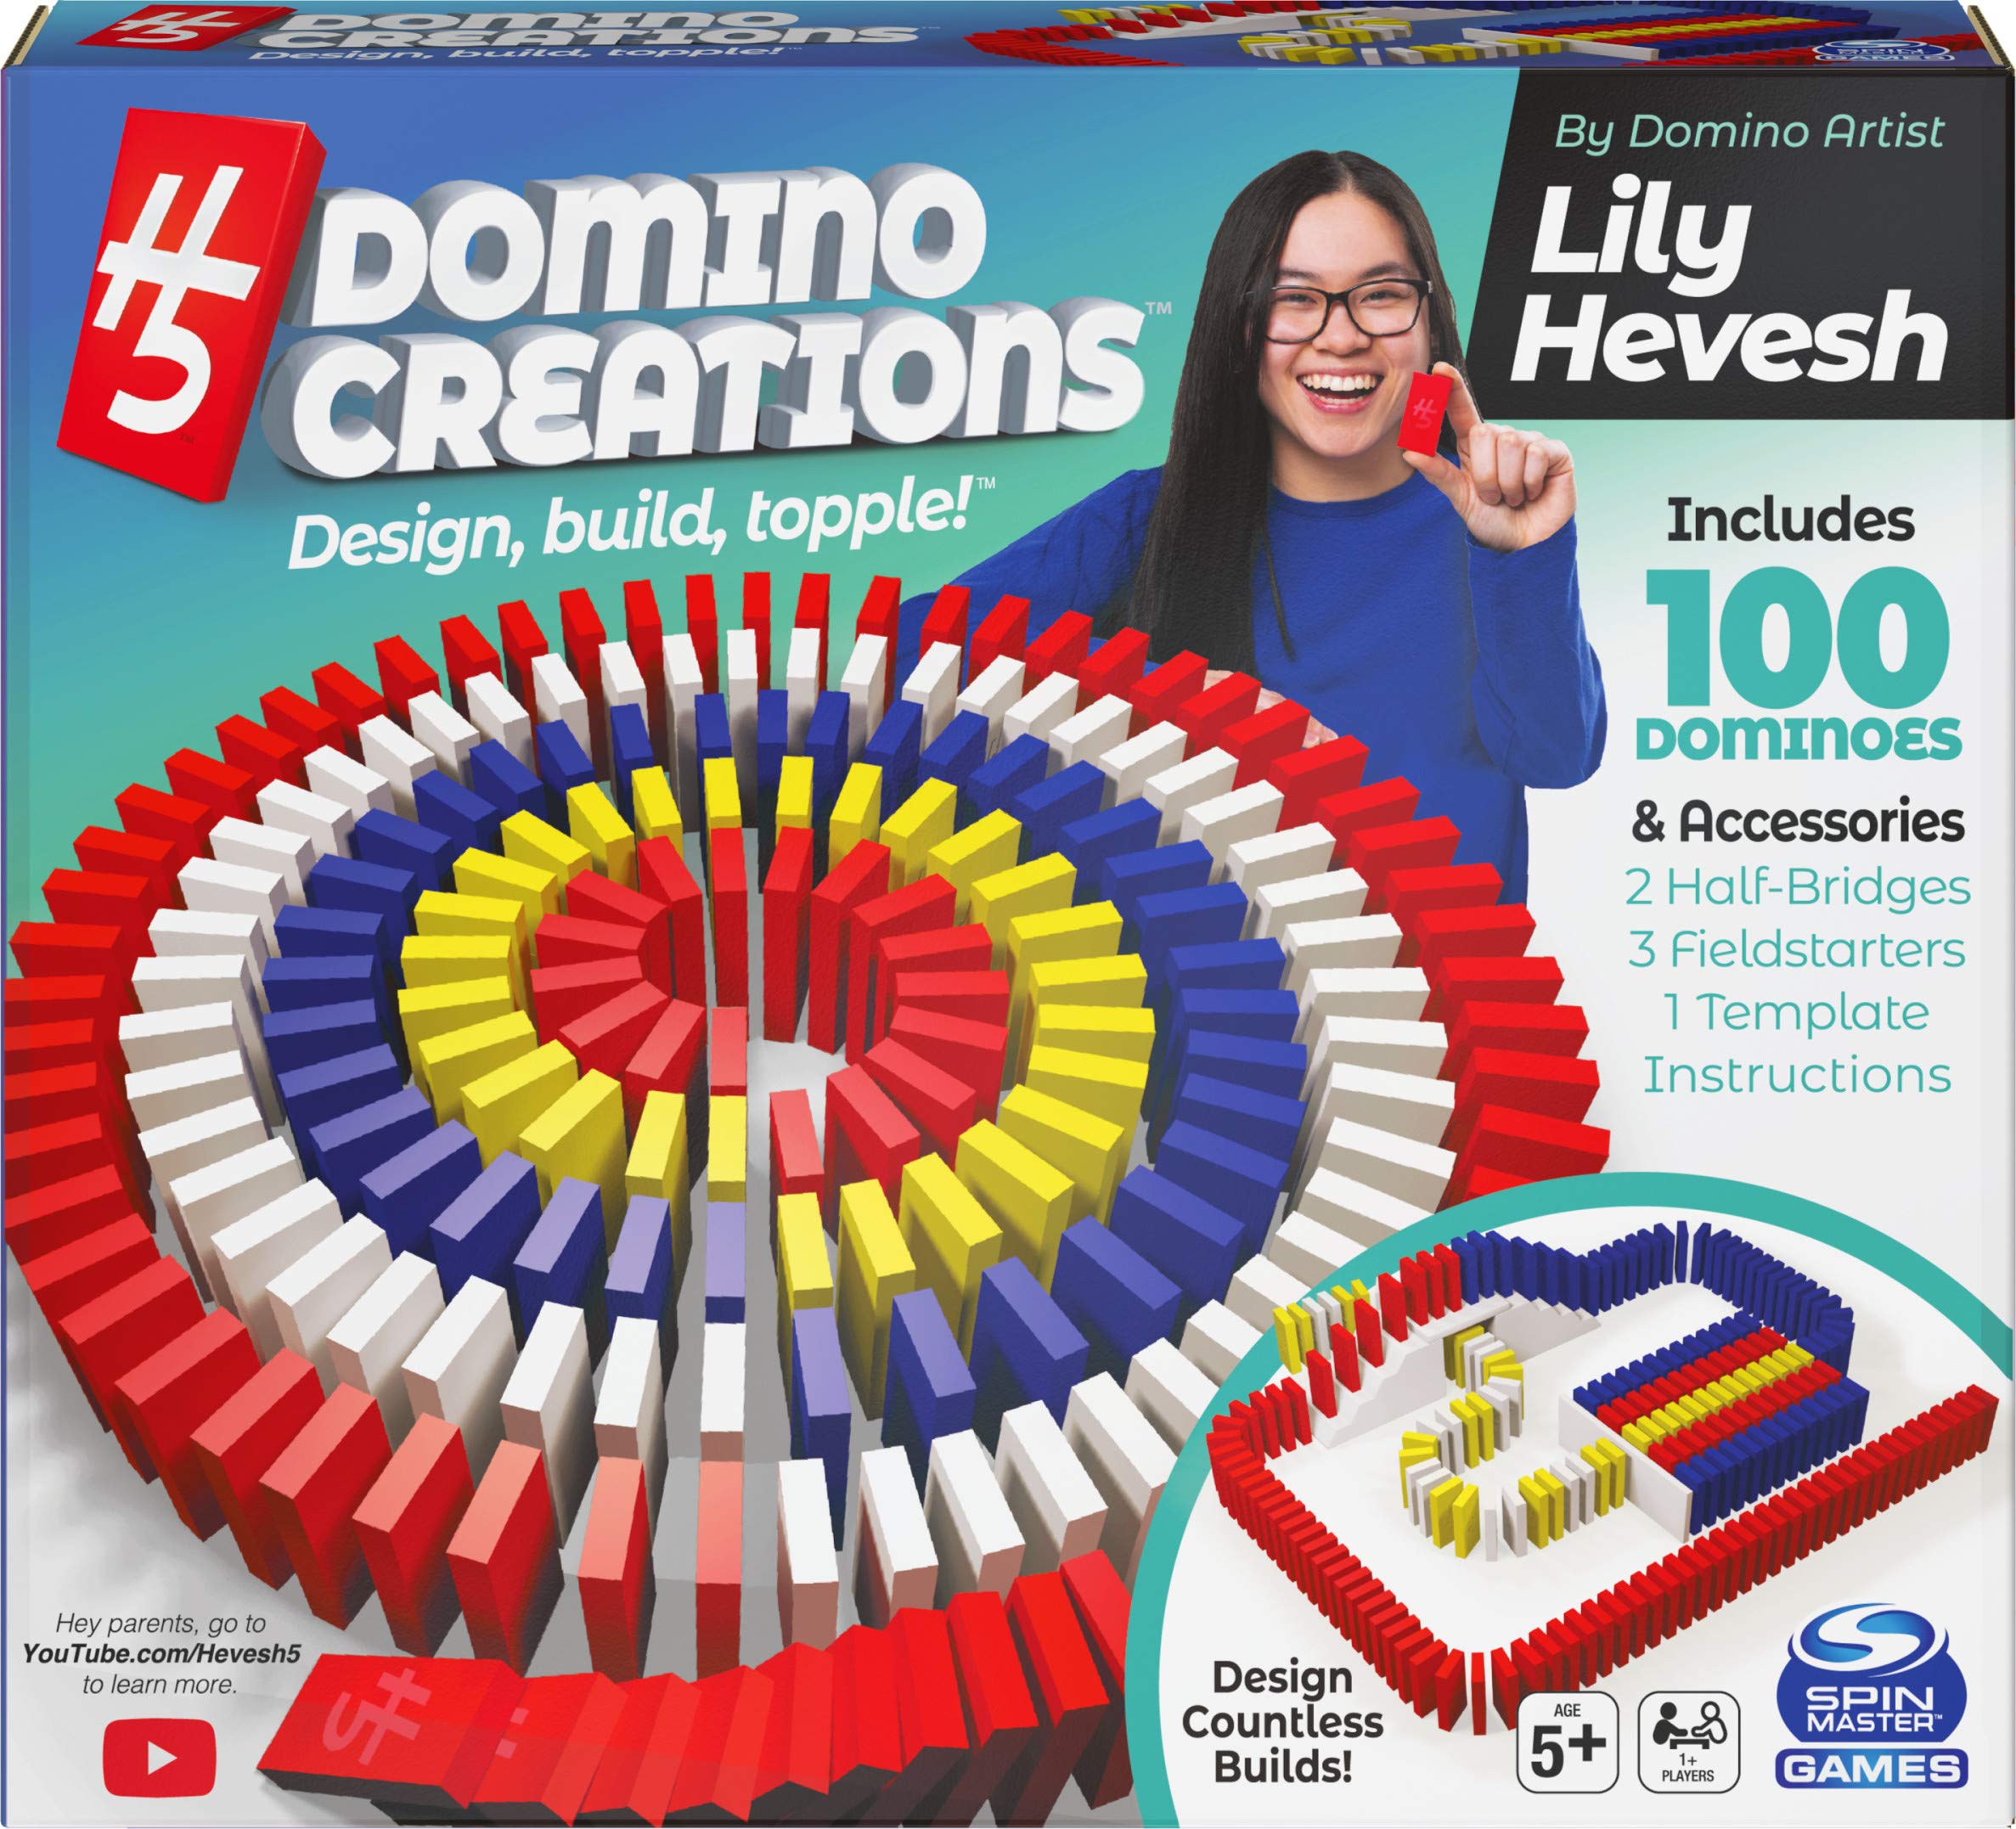 H5 Domino Creations 100-Piece Set Kids Games for Game Night Building Toys for Outdoor Games Lily Hevesh Dominoes Set for Adults & Kids Ages 5+